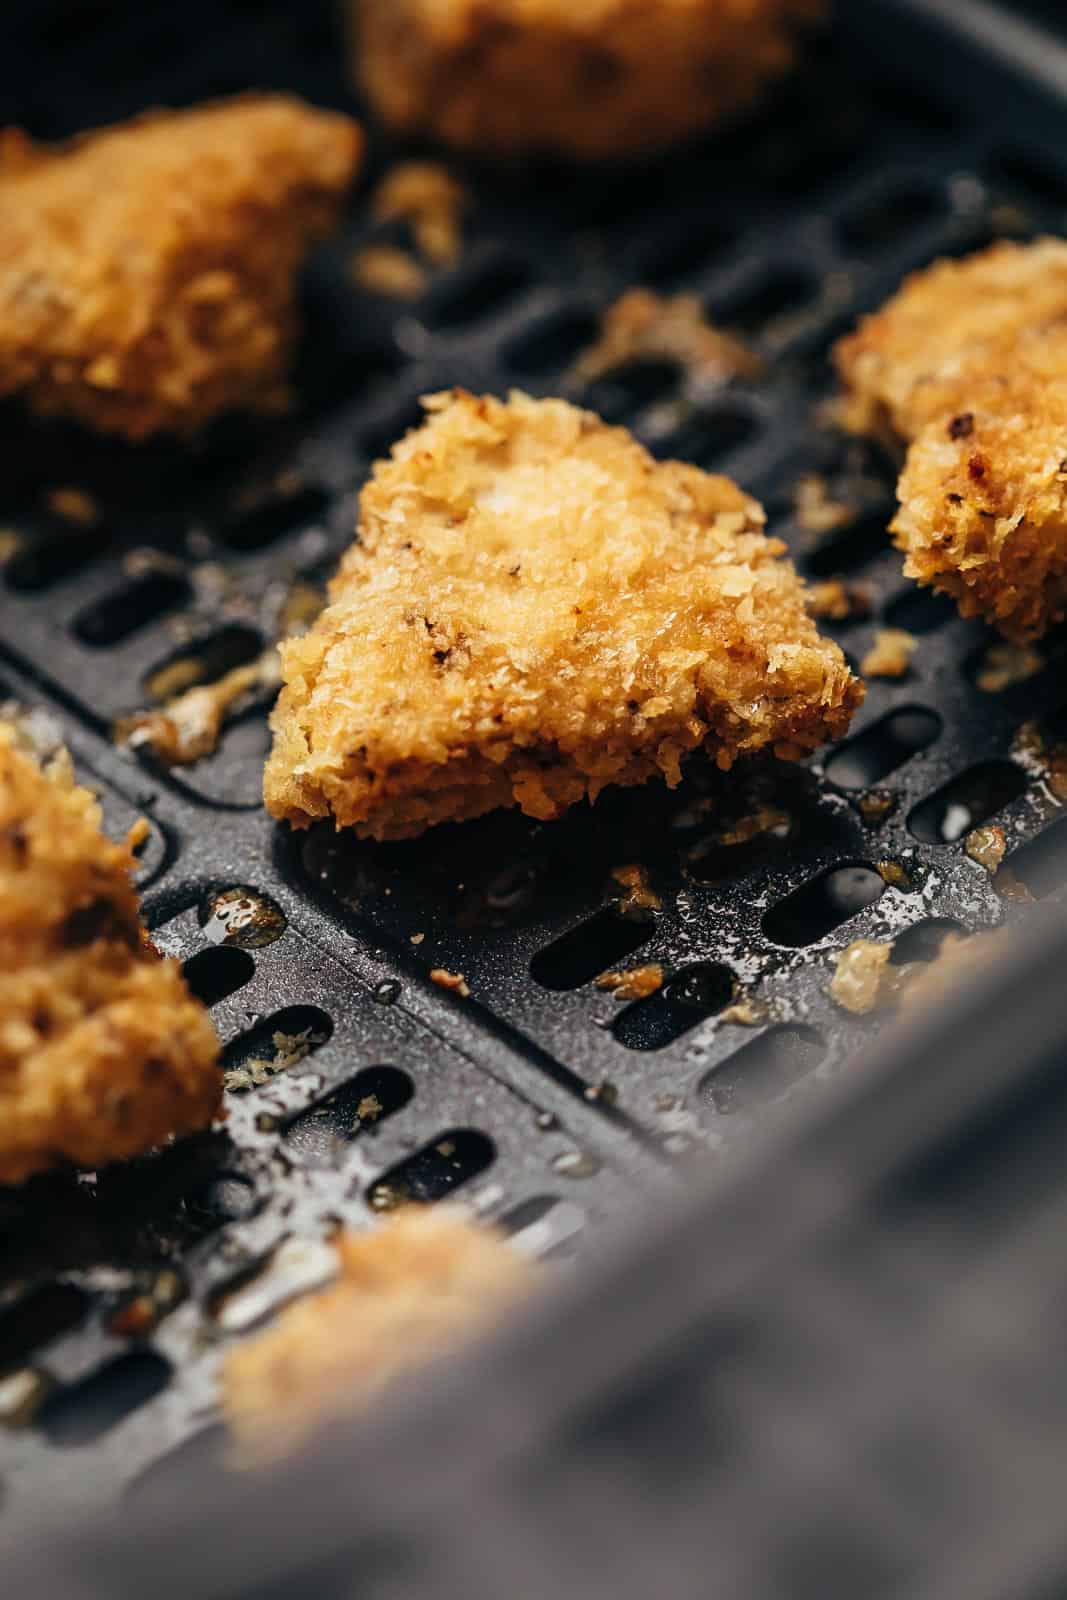 Closeup of Chicken Nugget in the Air Fryer basket